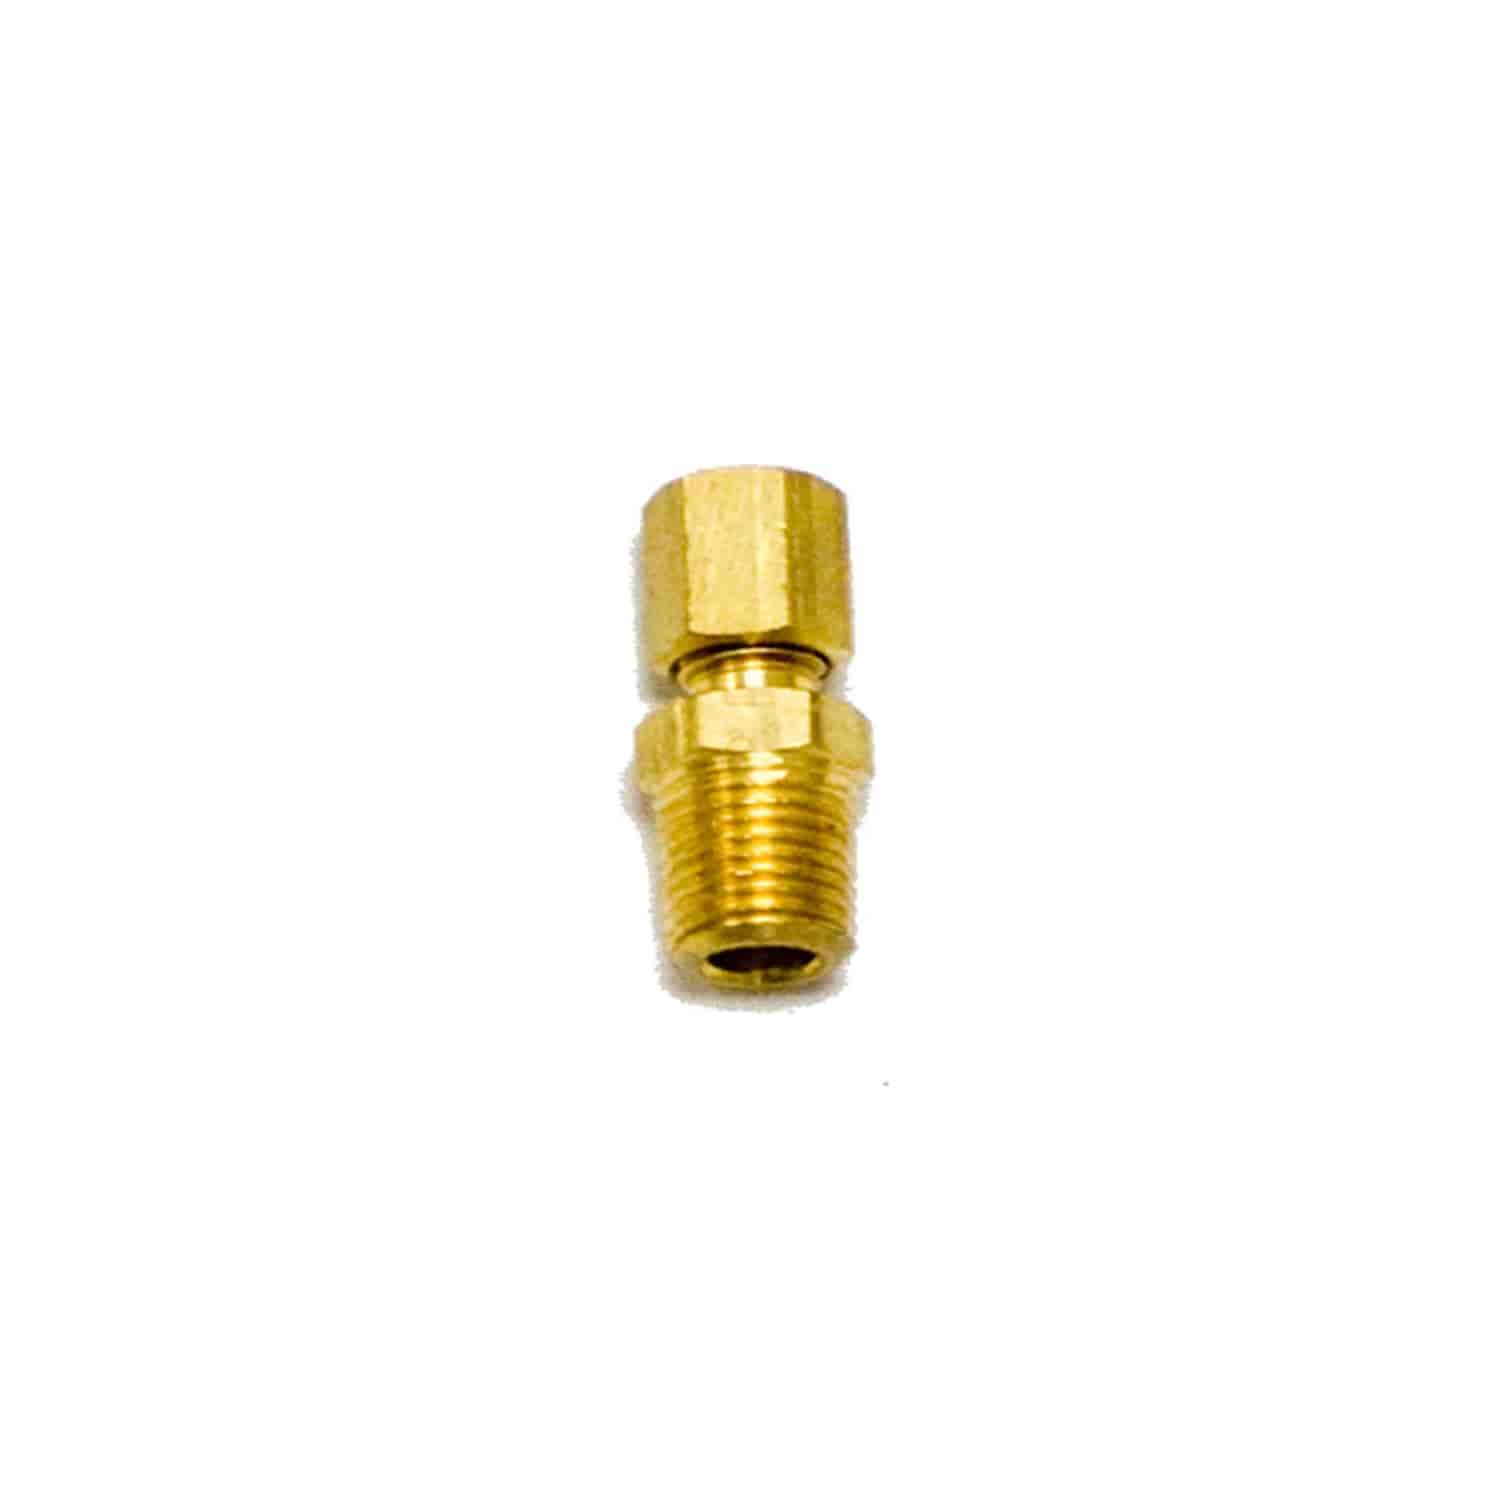 REPL COMPRESSION FITTING